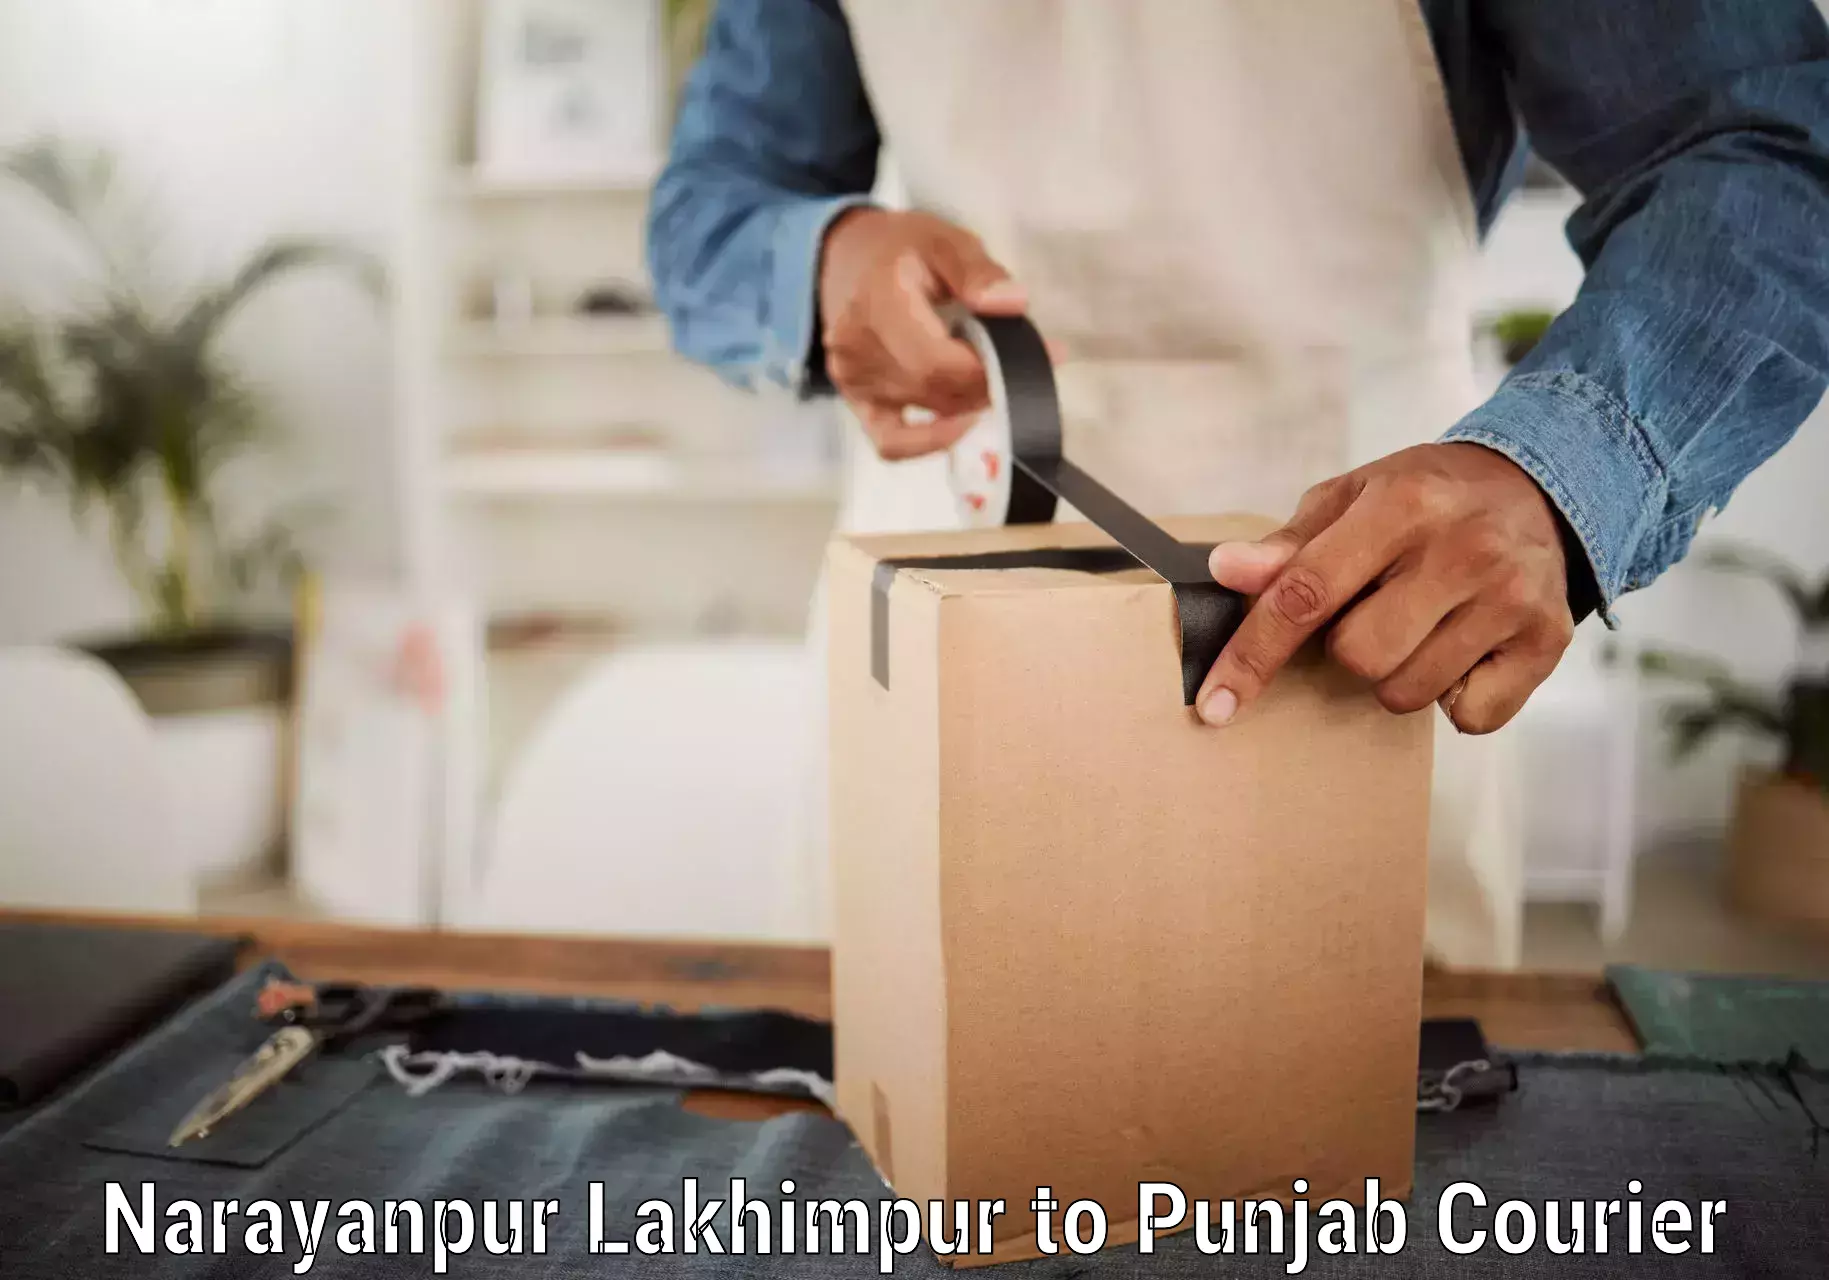 Global courier networks Narayanpur Lakhimpur to Mohali